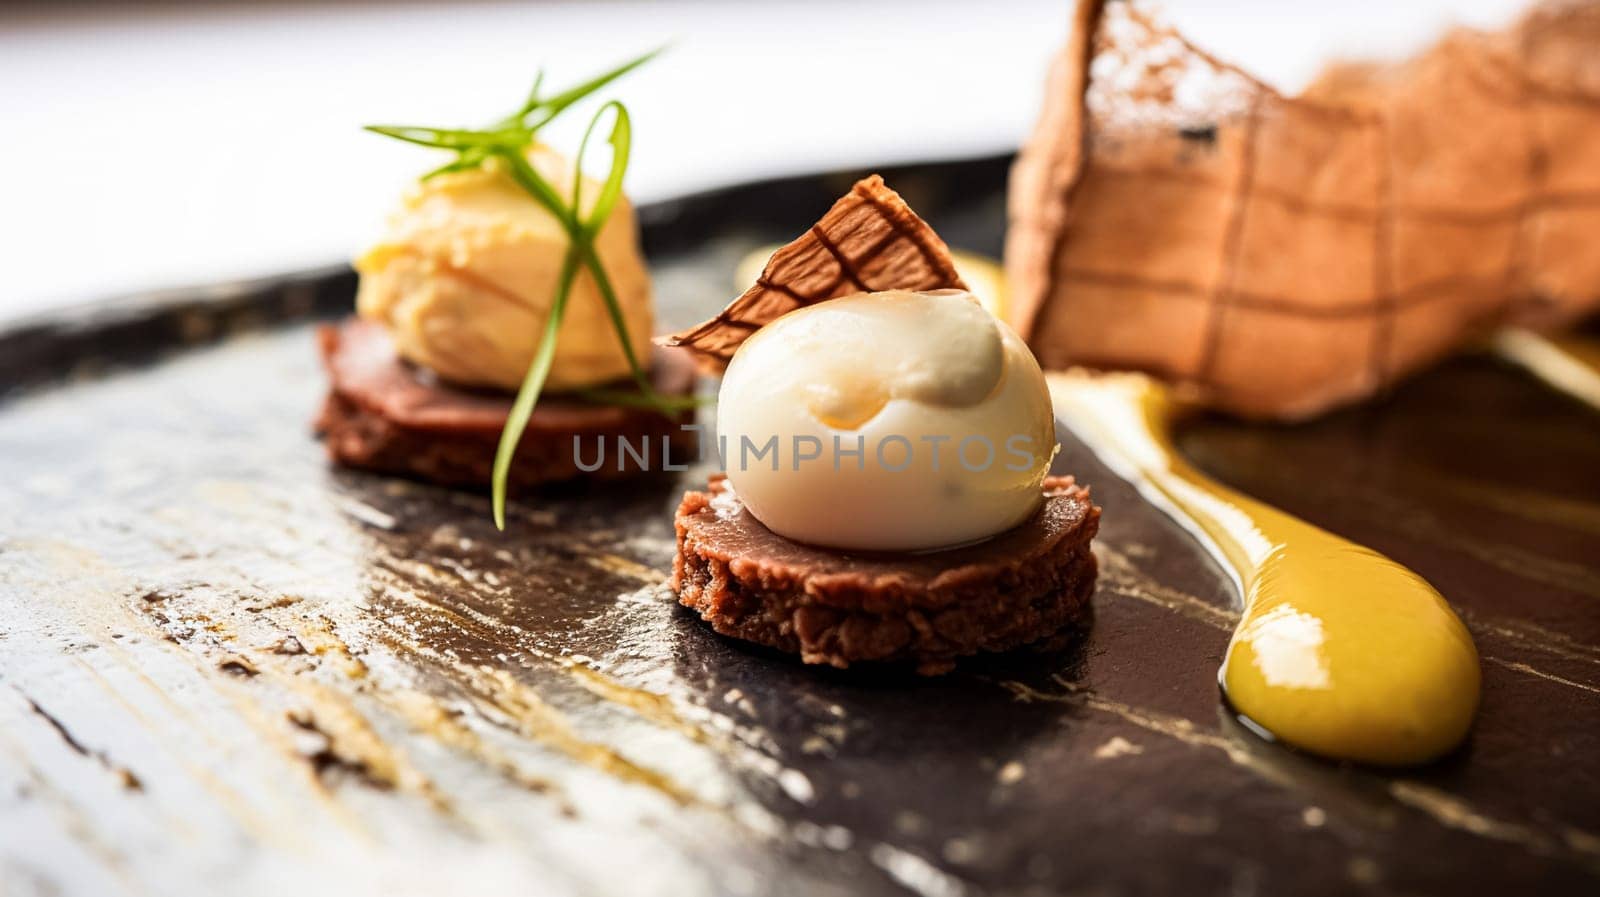 Food, hospitality and room service, starter appetisers as English countryside exquisite cuisine in hotel restaurant a la carte menu, culinary art and fine dining by Anneleven